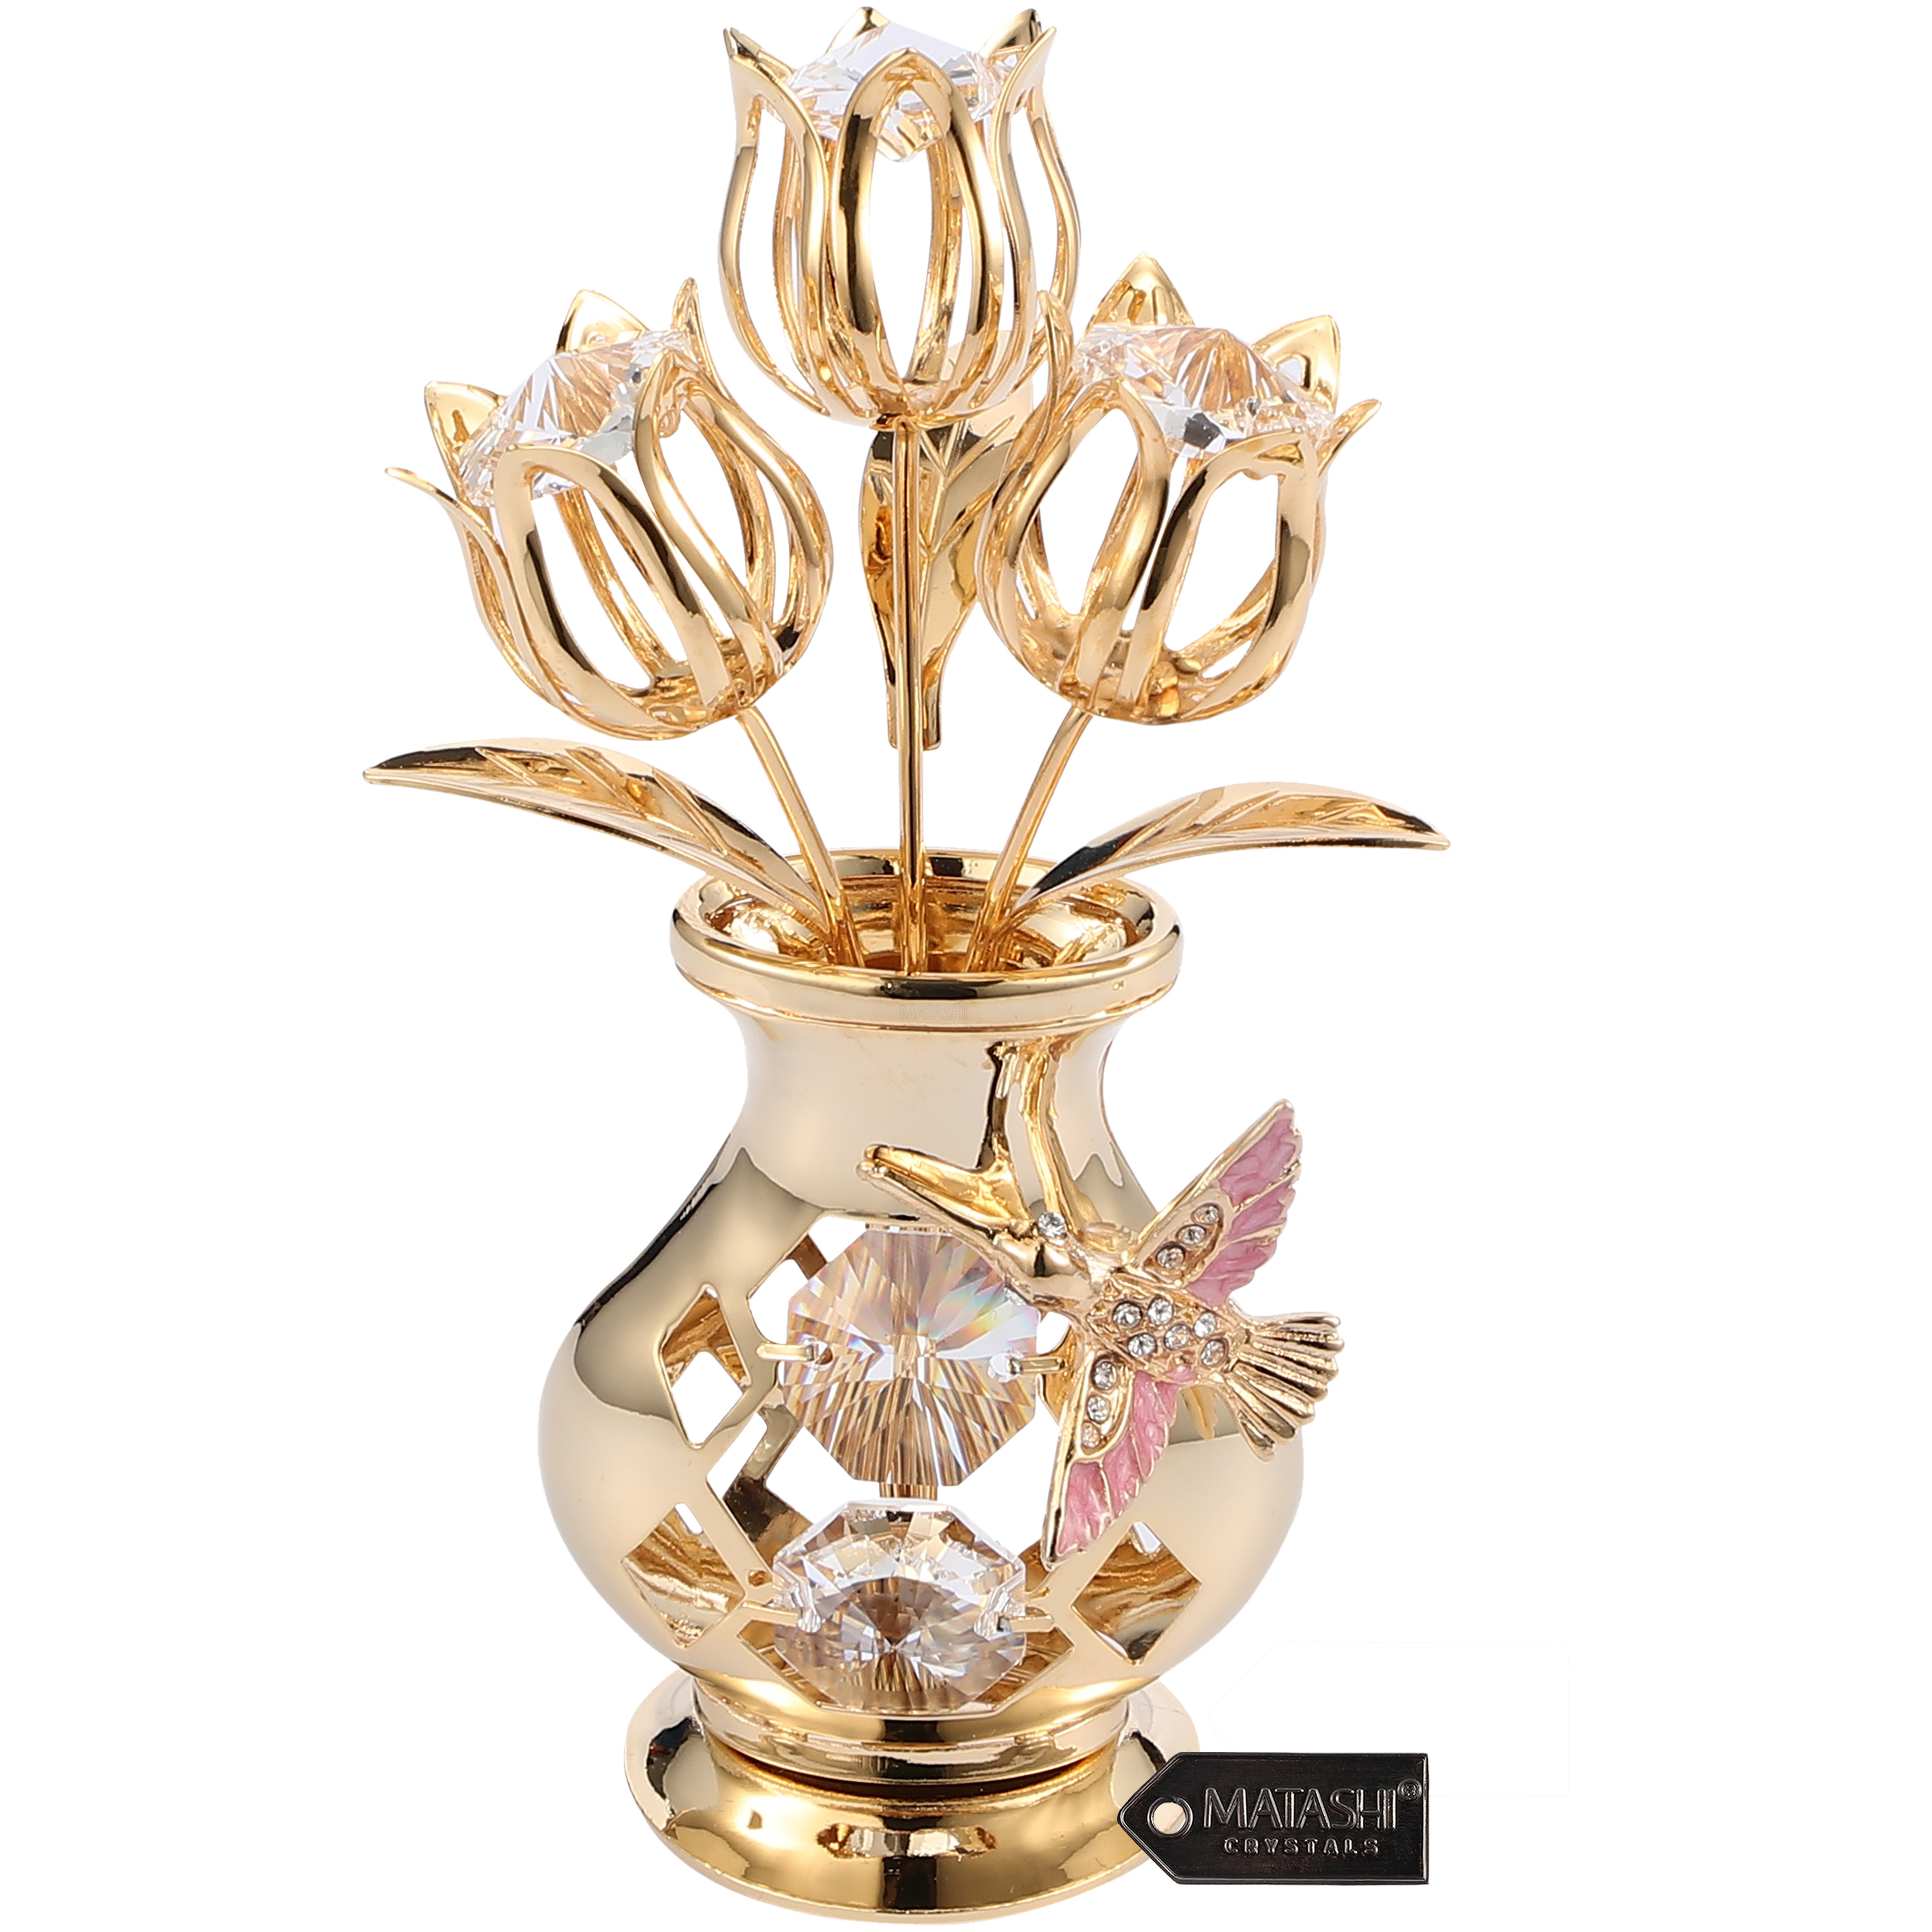 Matashi 24K Gold Plated Crystal Studded Flower Ornament In Vase W/ Decorative Hummingbird Tabletop Gift For Mother's Day Valentine's Day - C